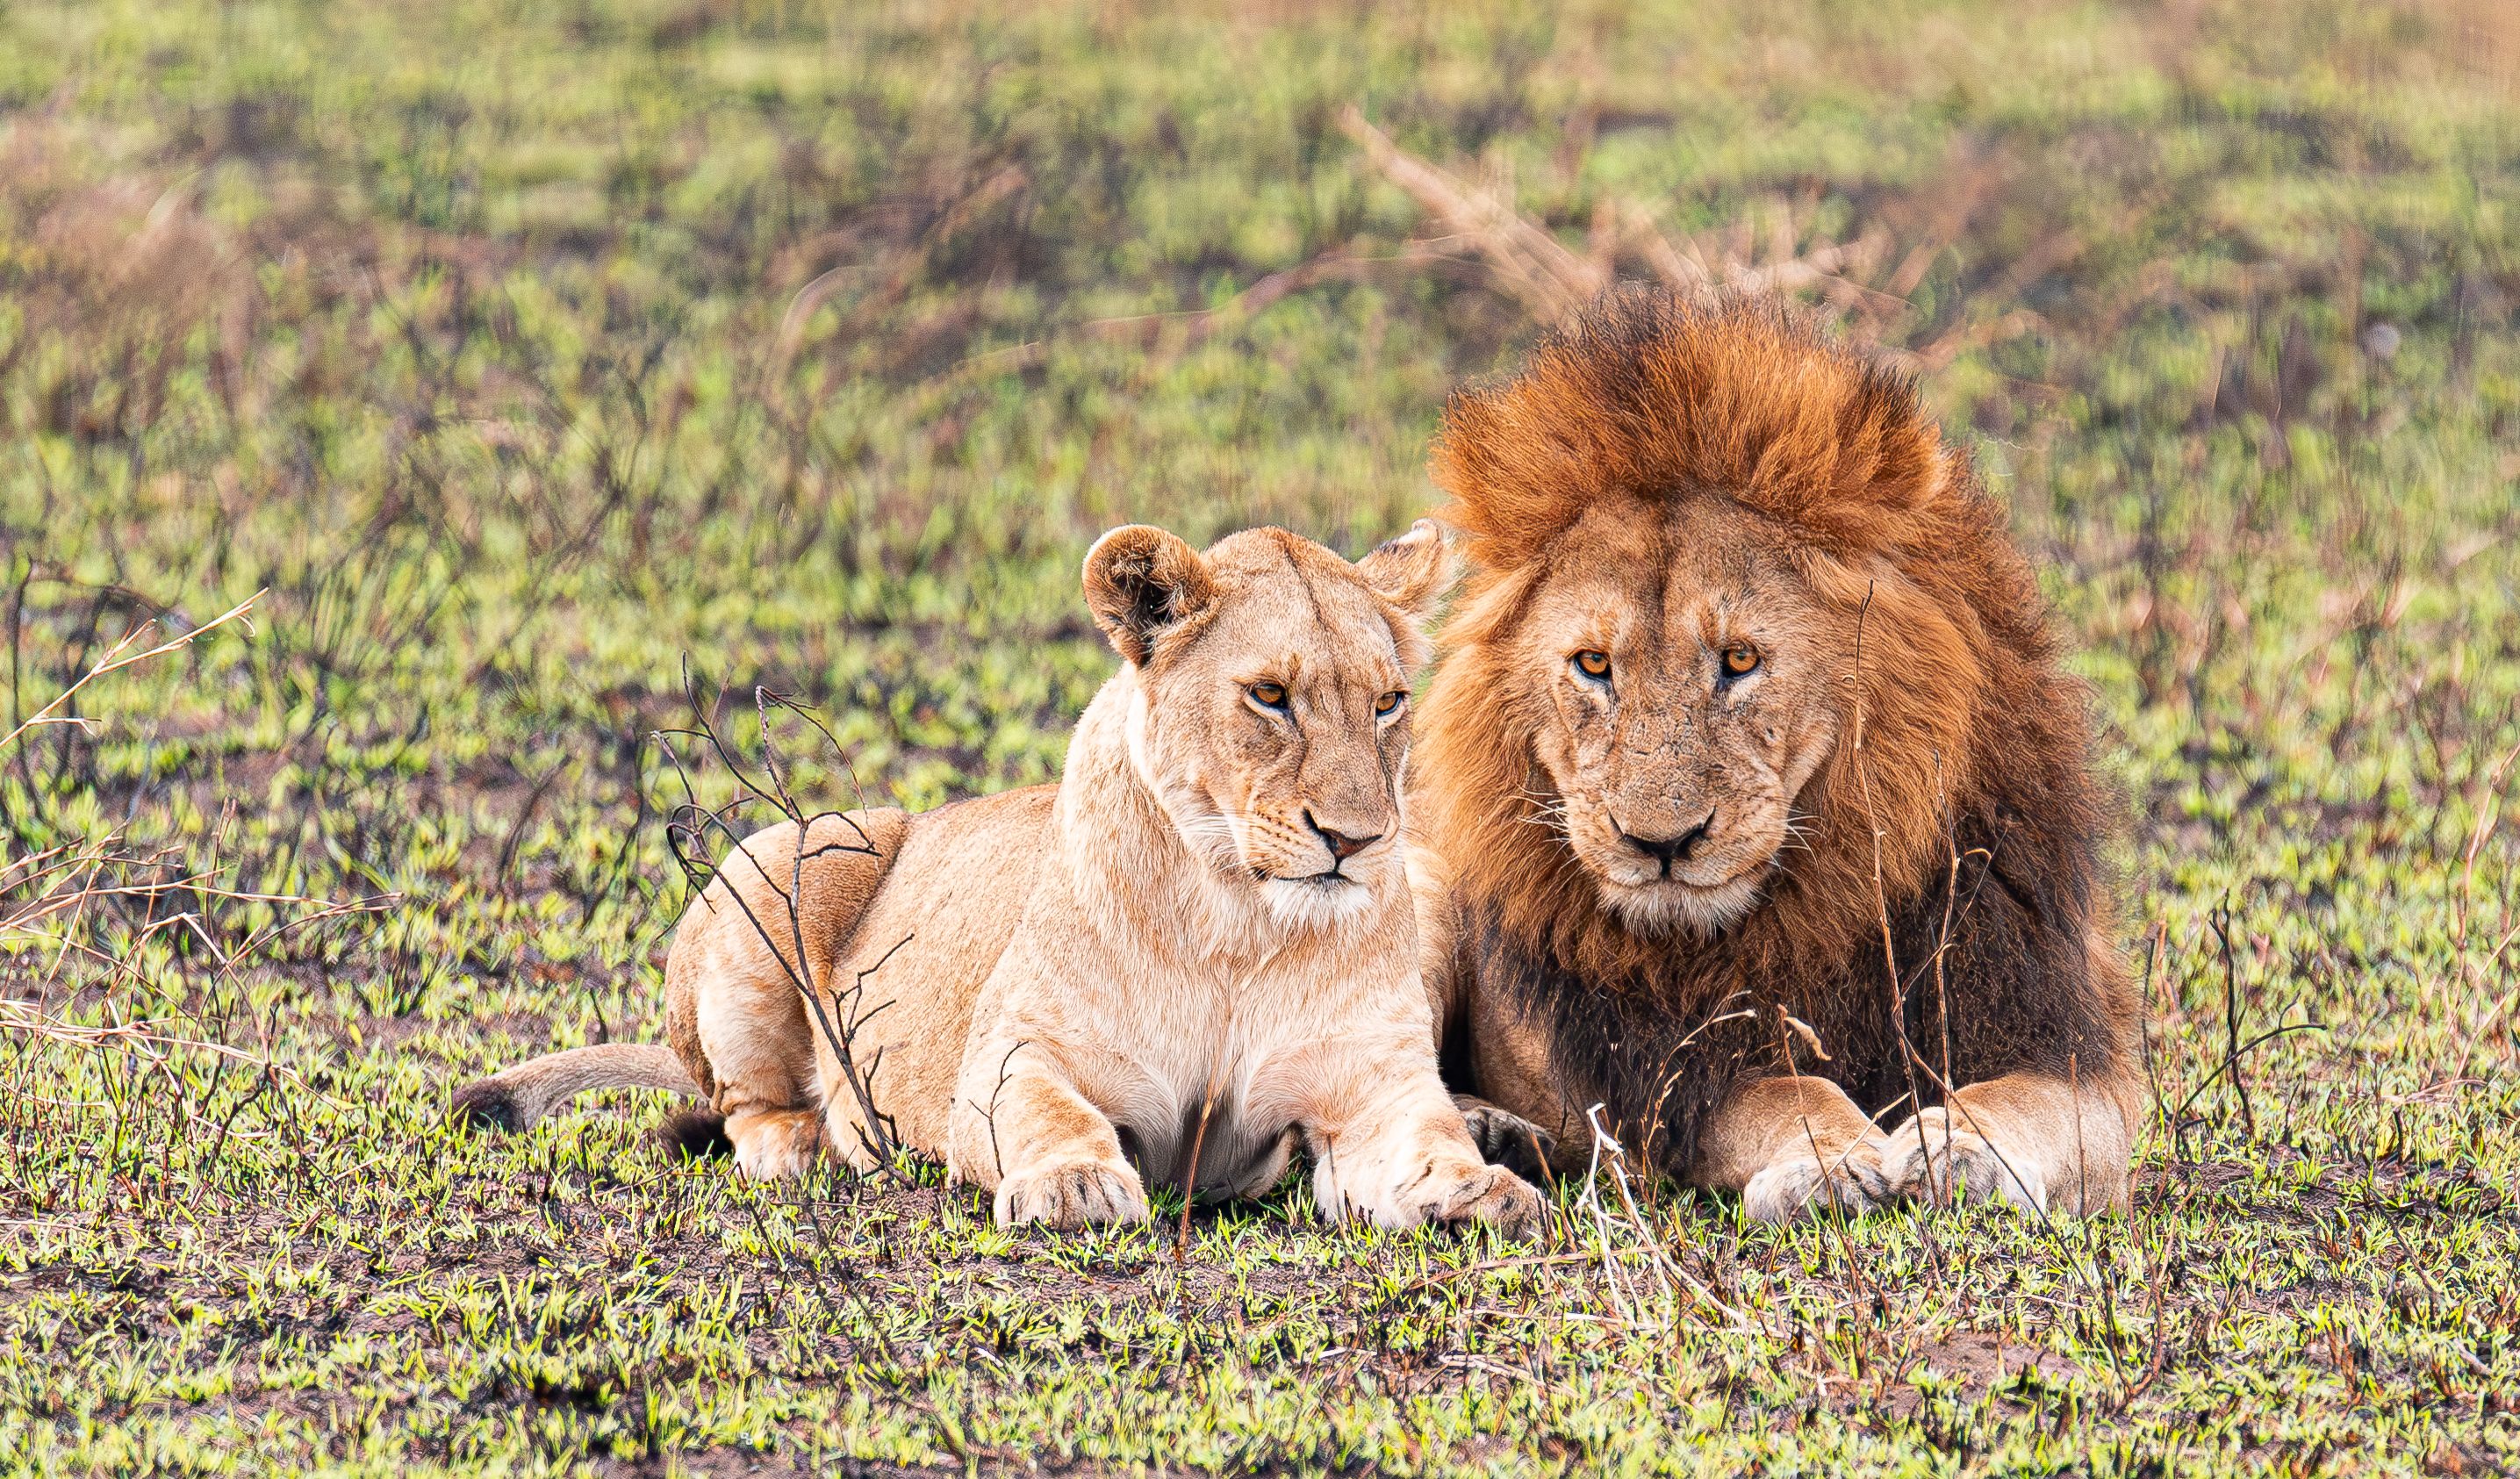 Lion and mate relaxing